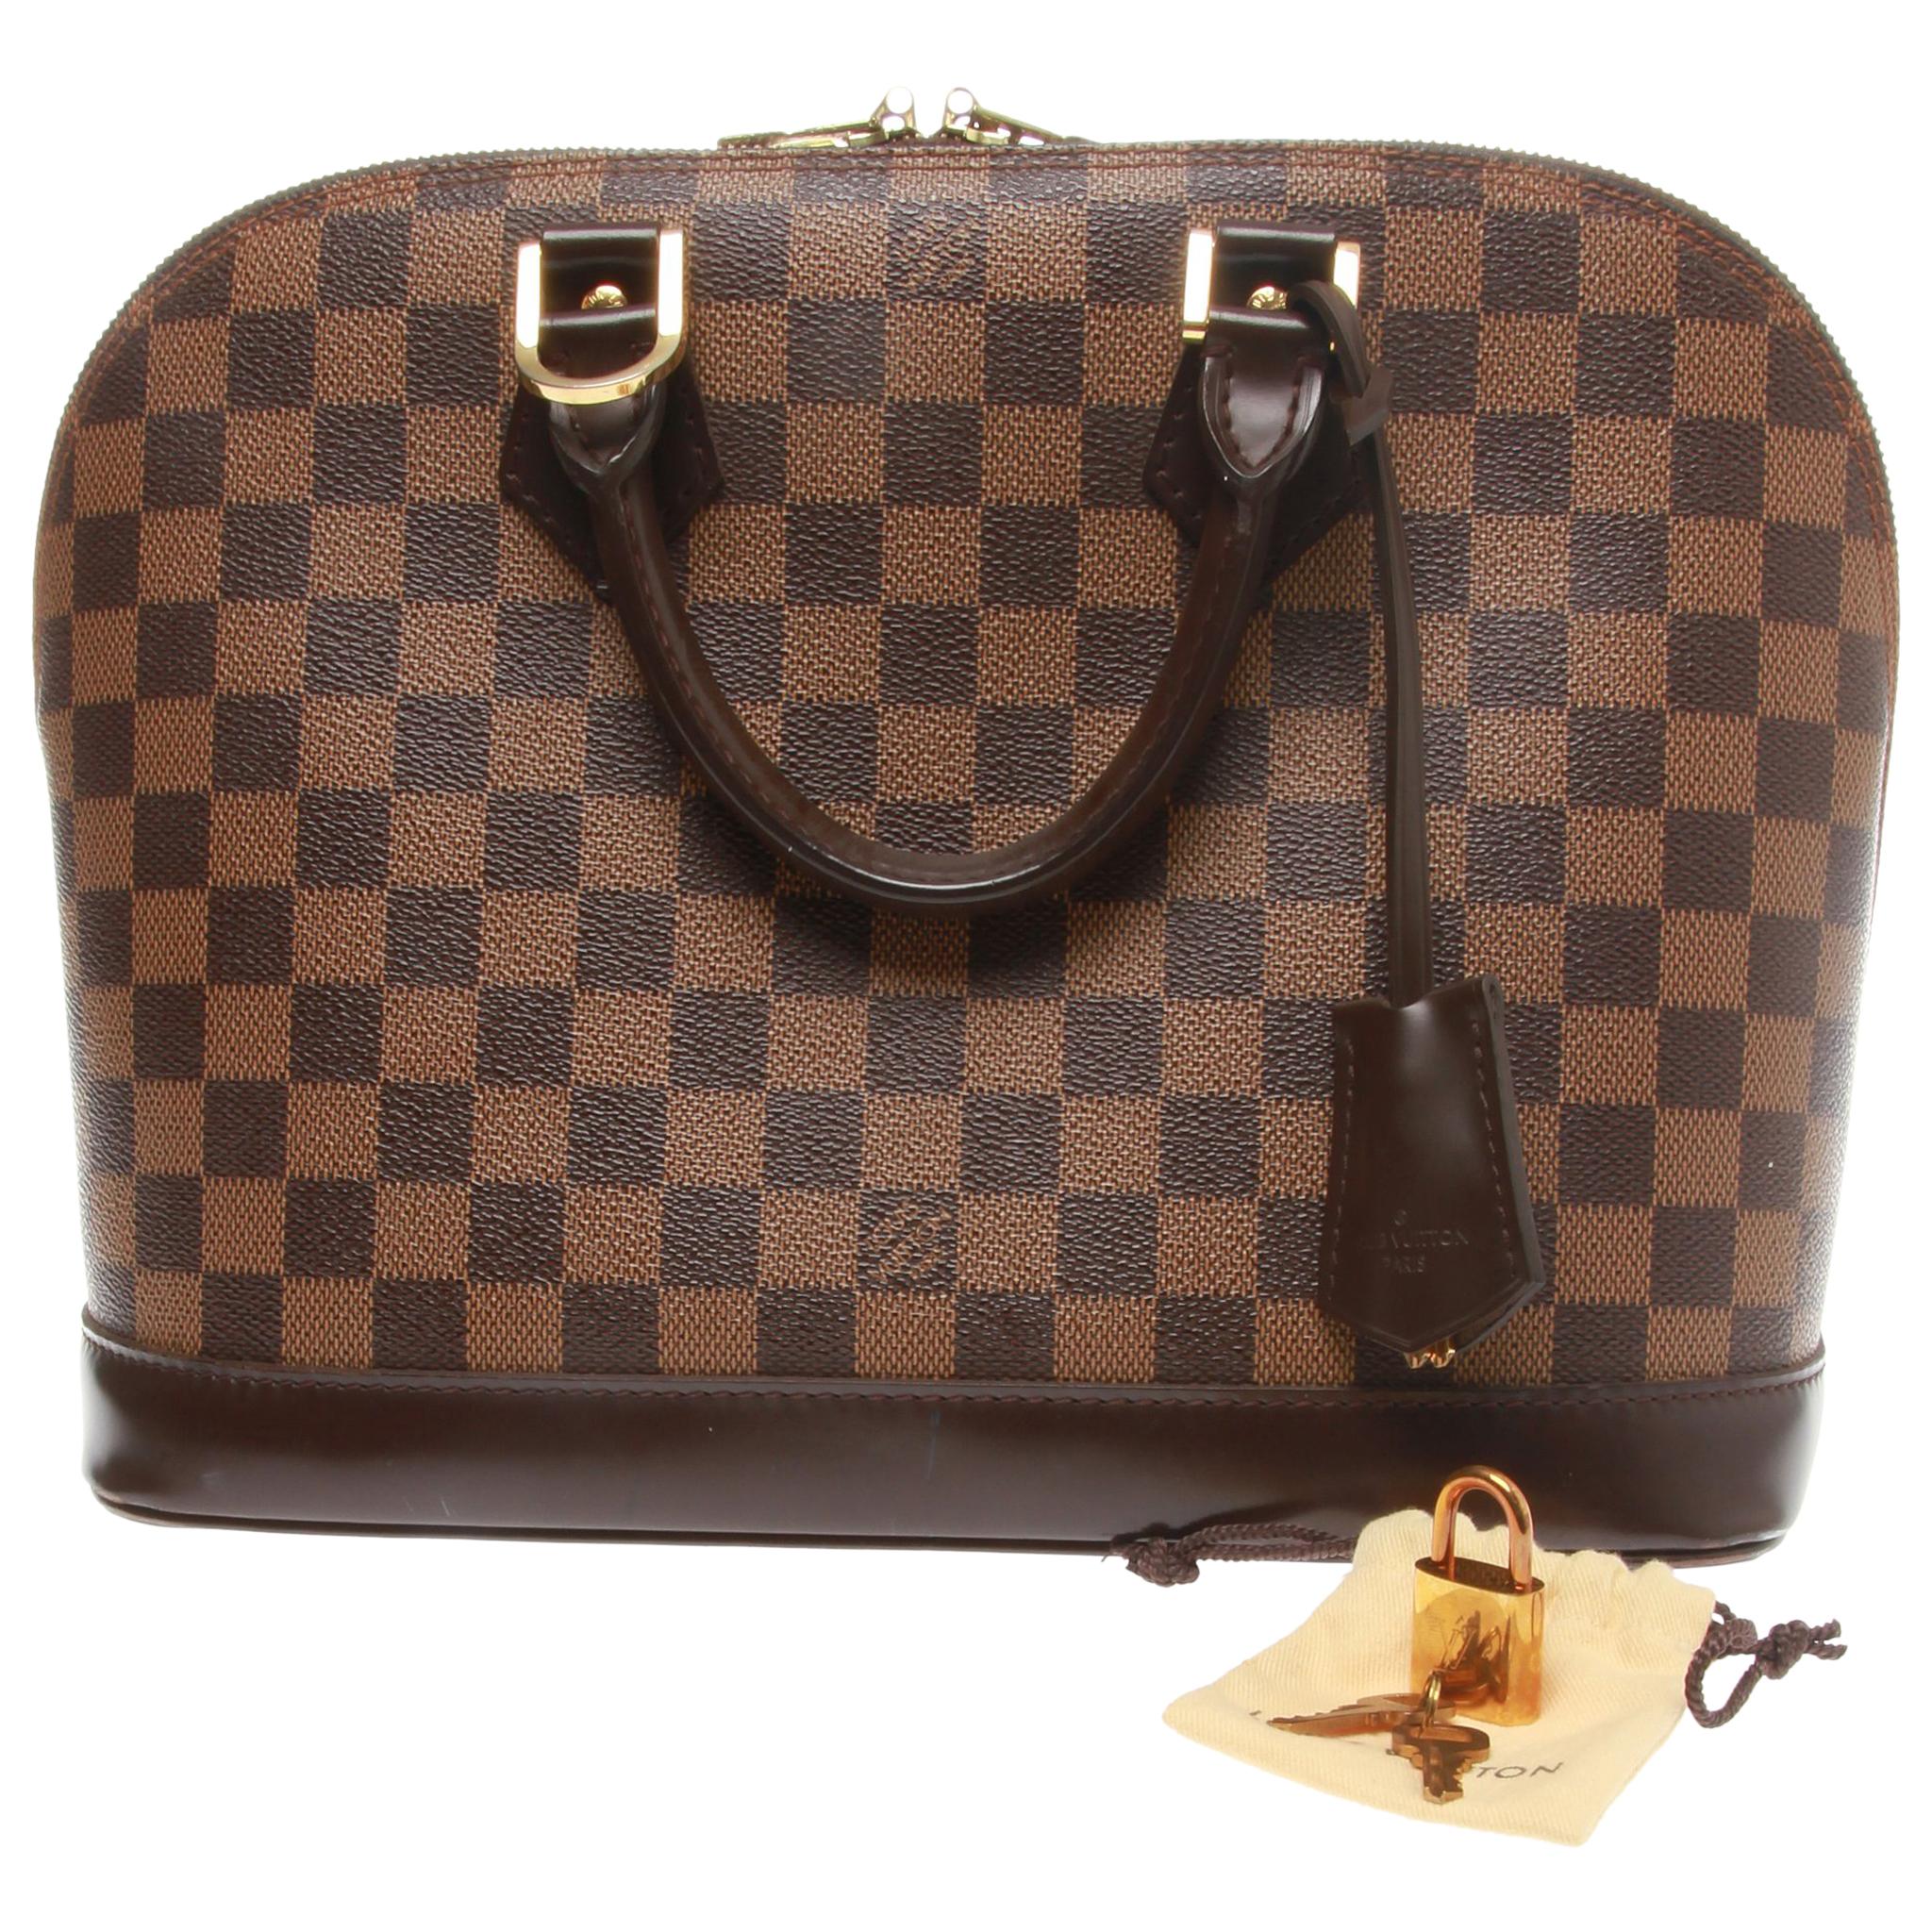 Louis Vuitton, Bags, Louis Vuitton Alma Bb Great Condition Brand New Lock  Keys And Clochette